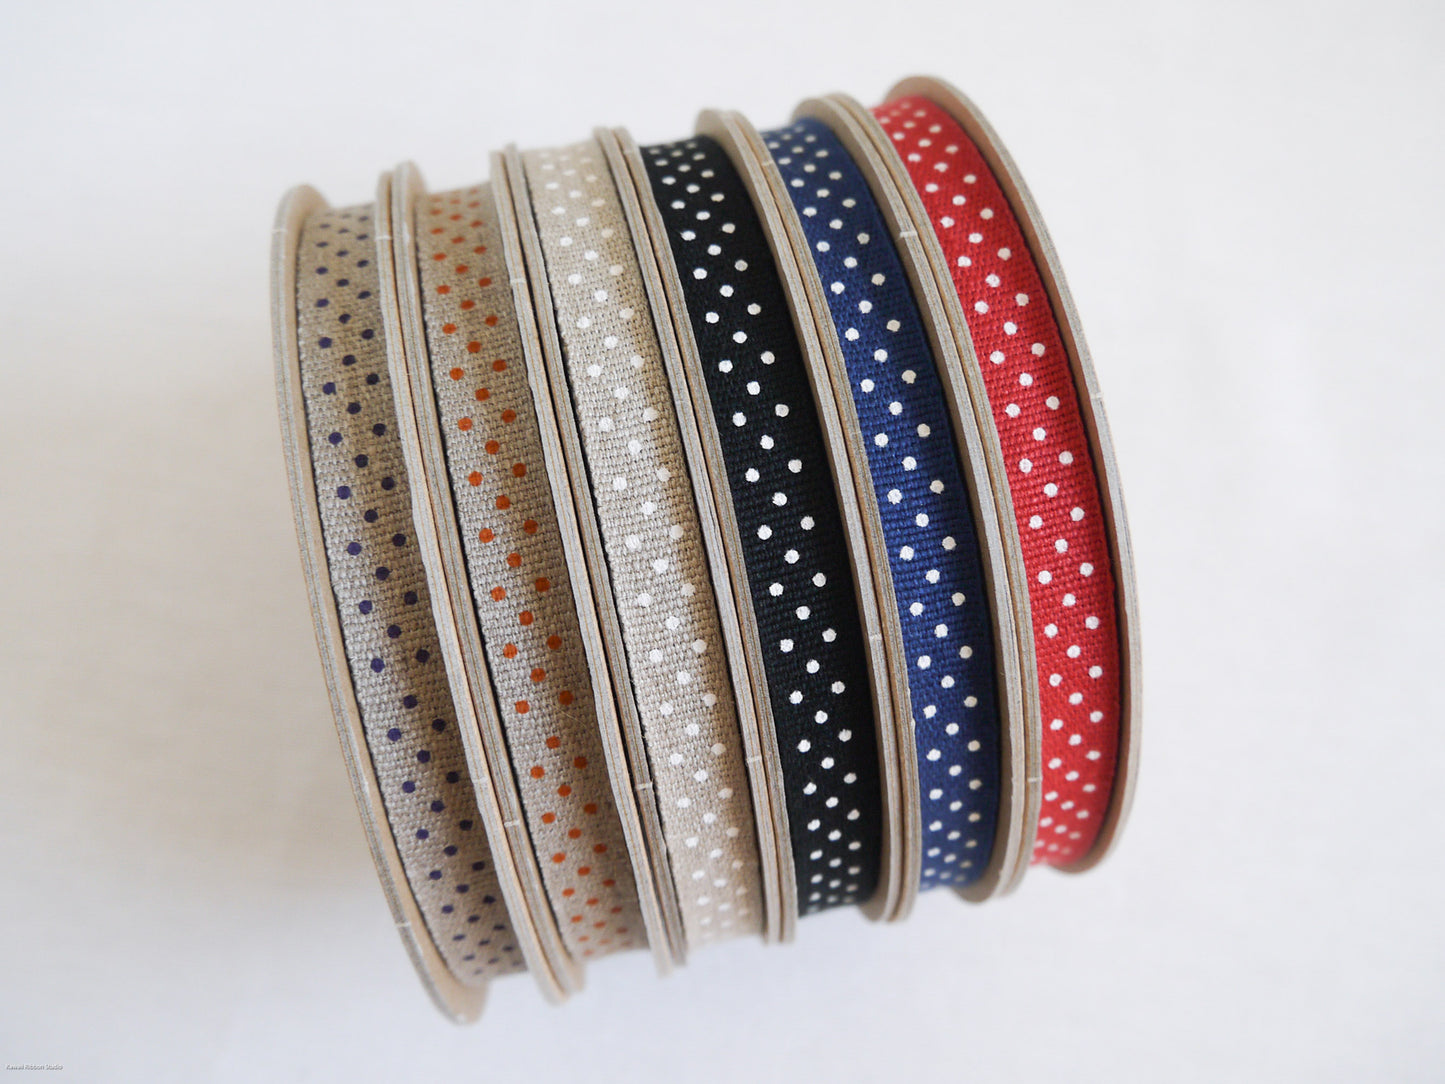 10mm Polka dots ribbon/ tape in 100% washed linen